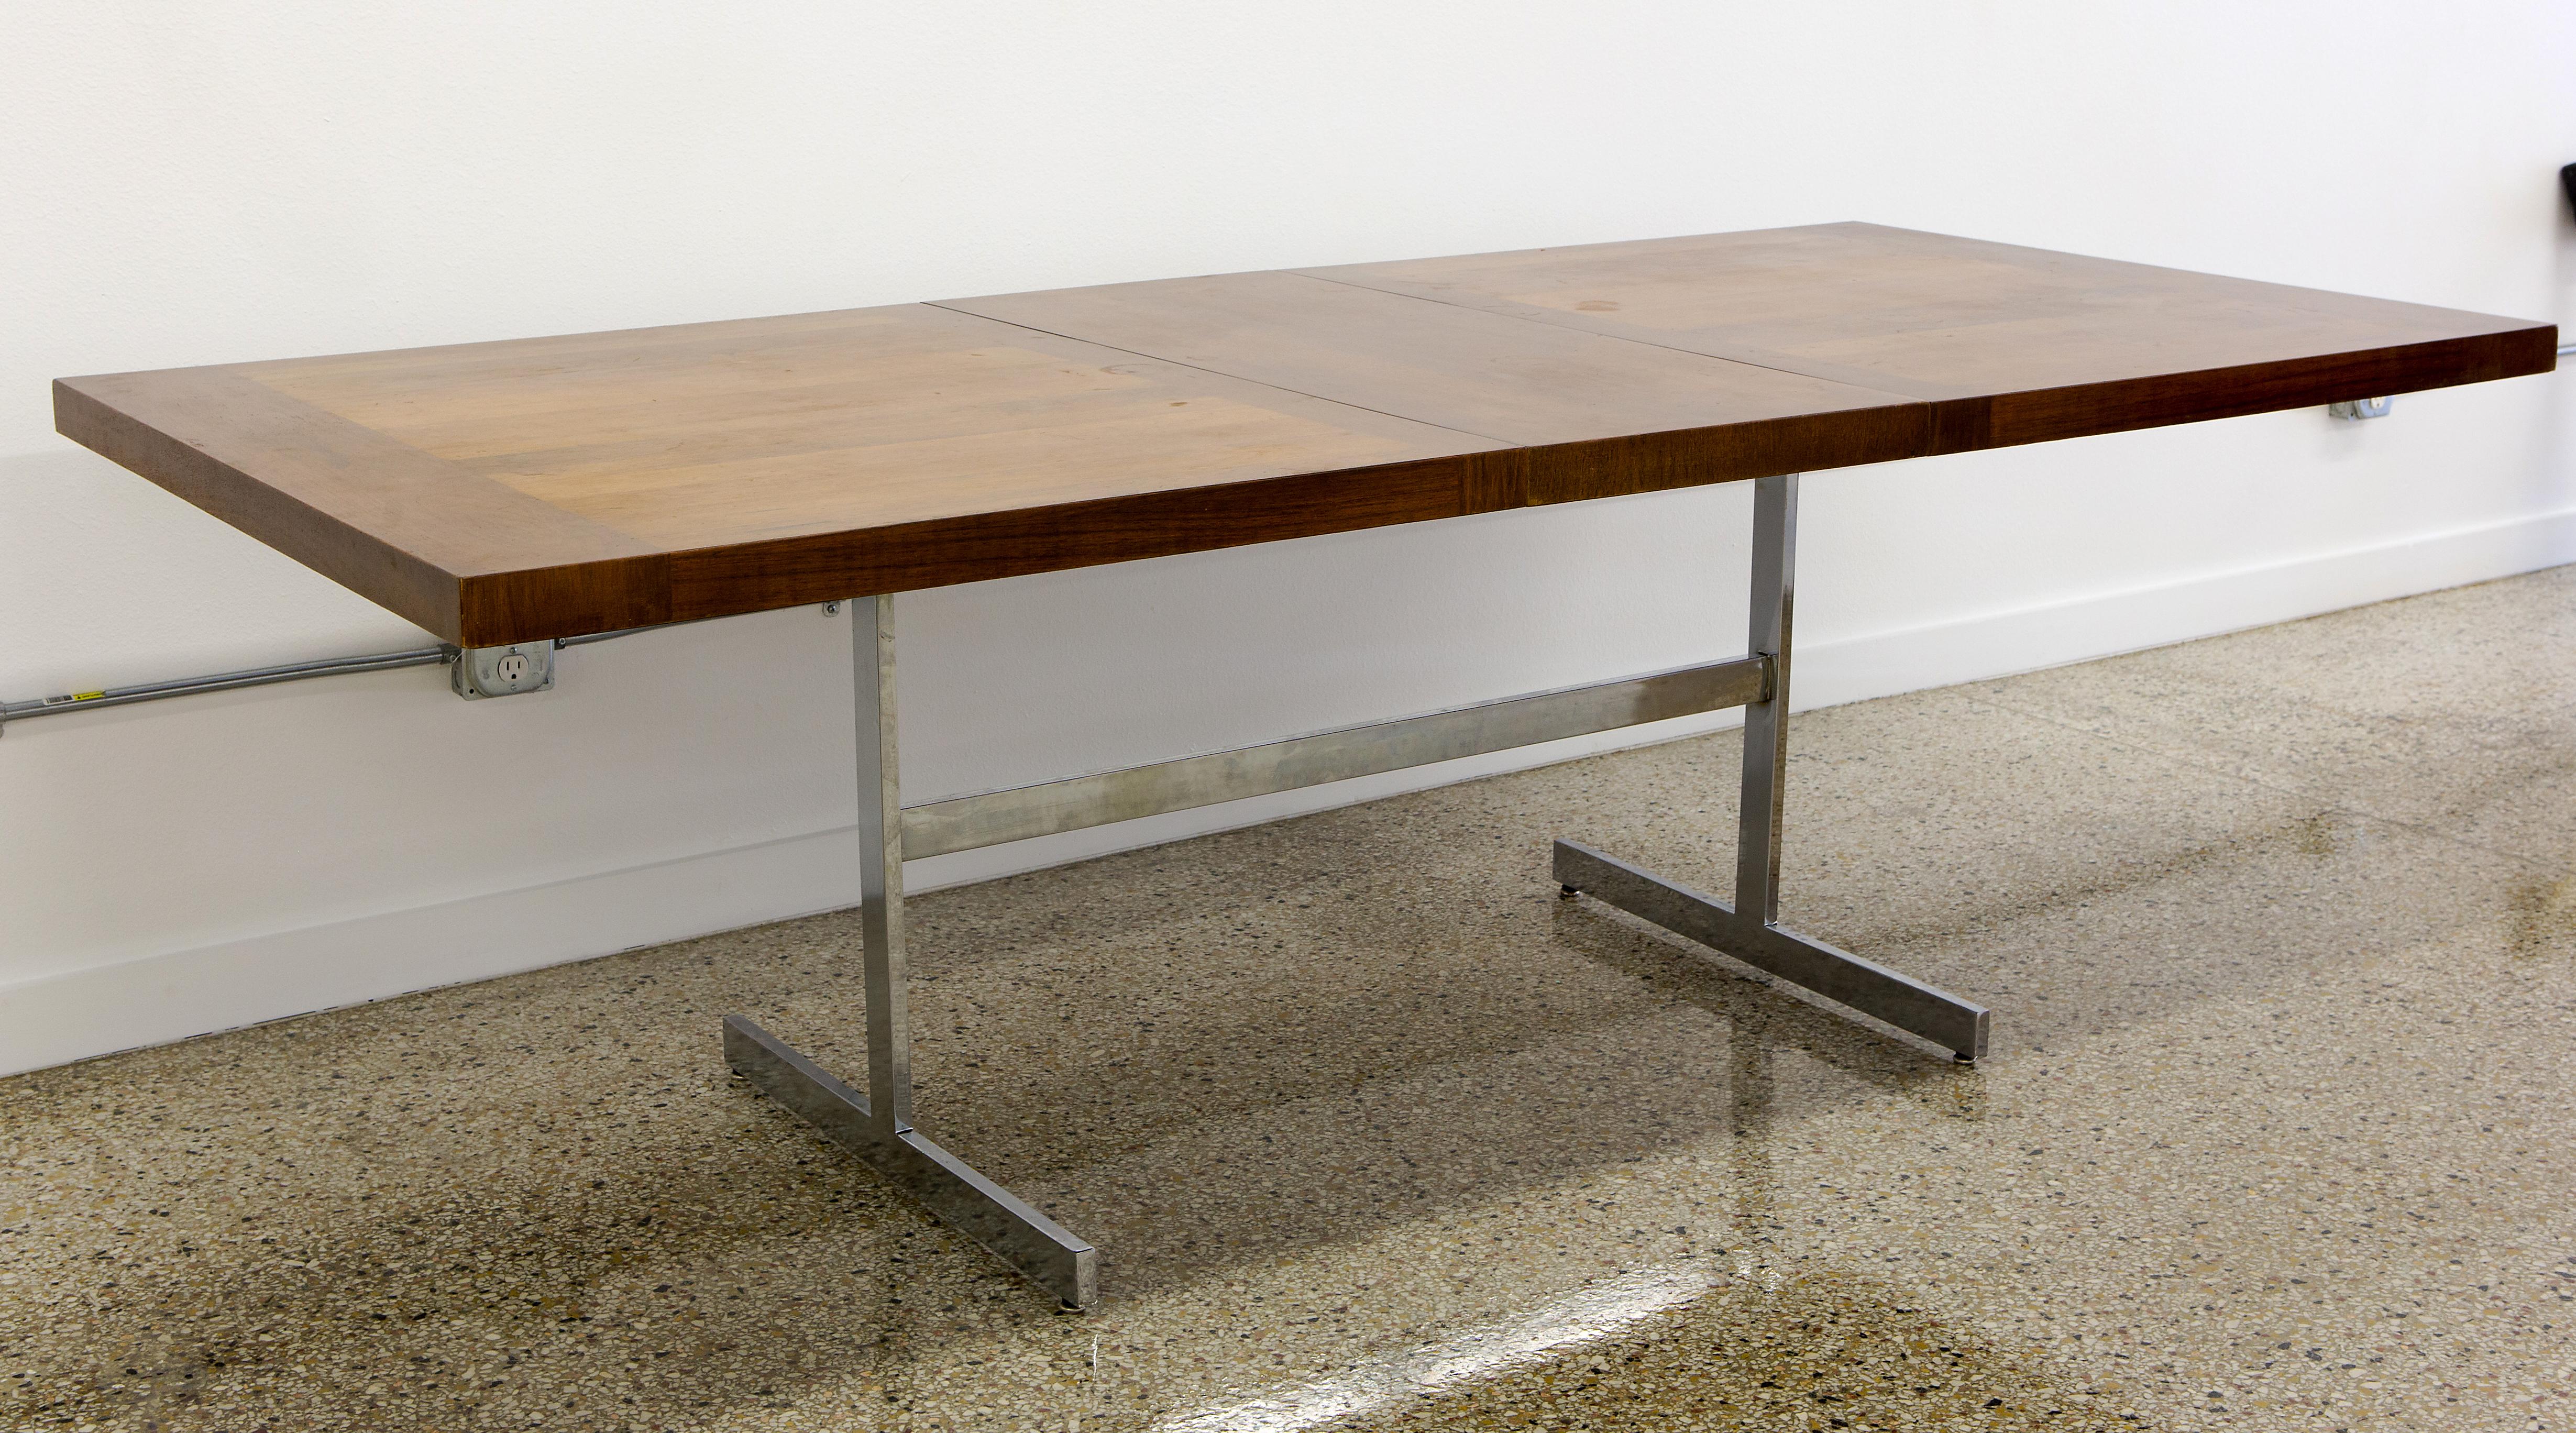 Dining table of rosewood with one leaf extension on chrome steel base. Designed by Alfred Hendrickx for Bellform Furniture, Belgium, circa 1960s. This table represents Hendrickx's classic combination of a fine wood teak top with an industrial steel